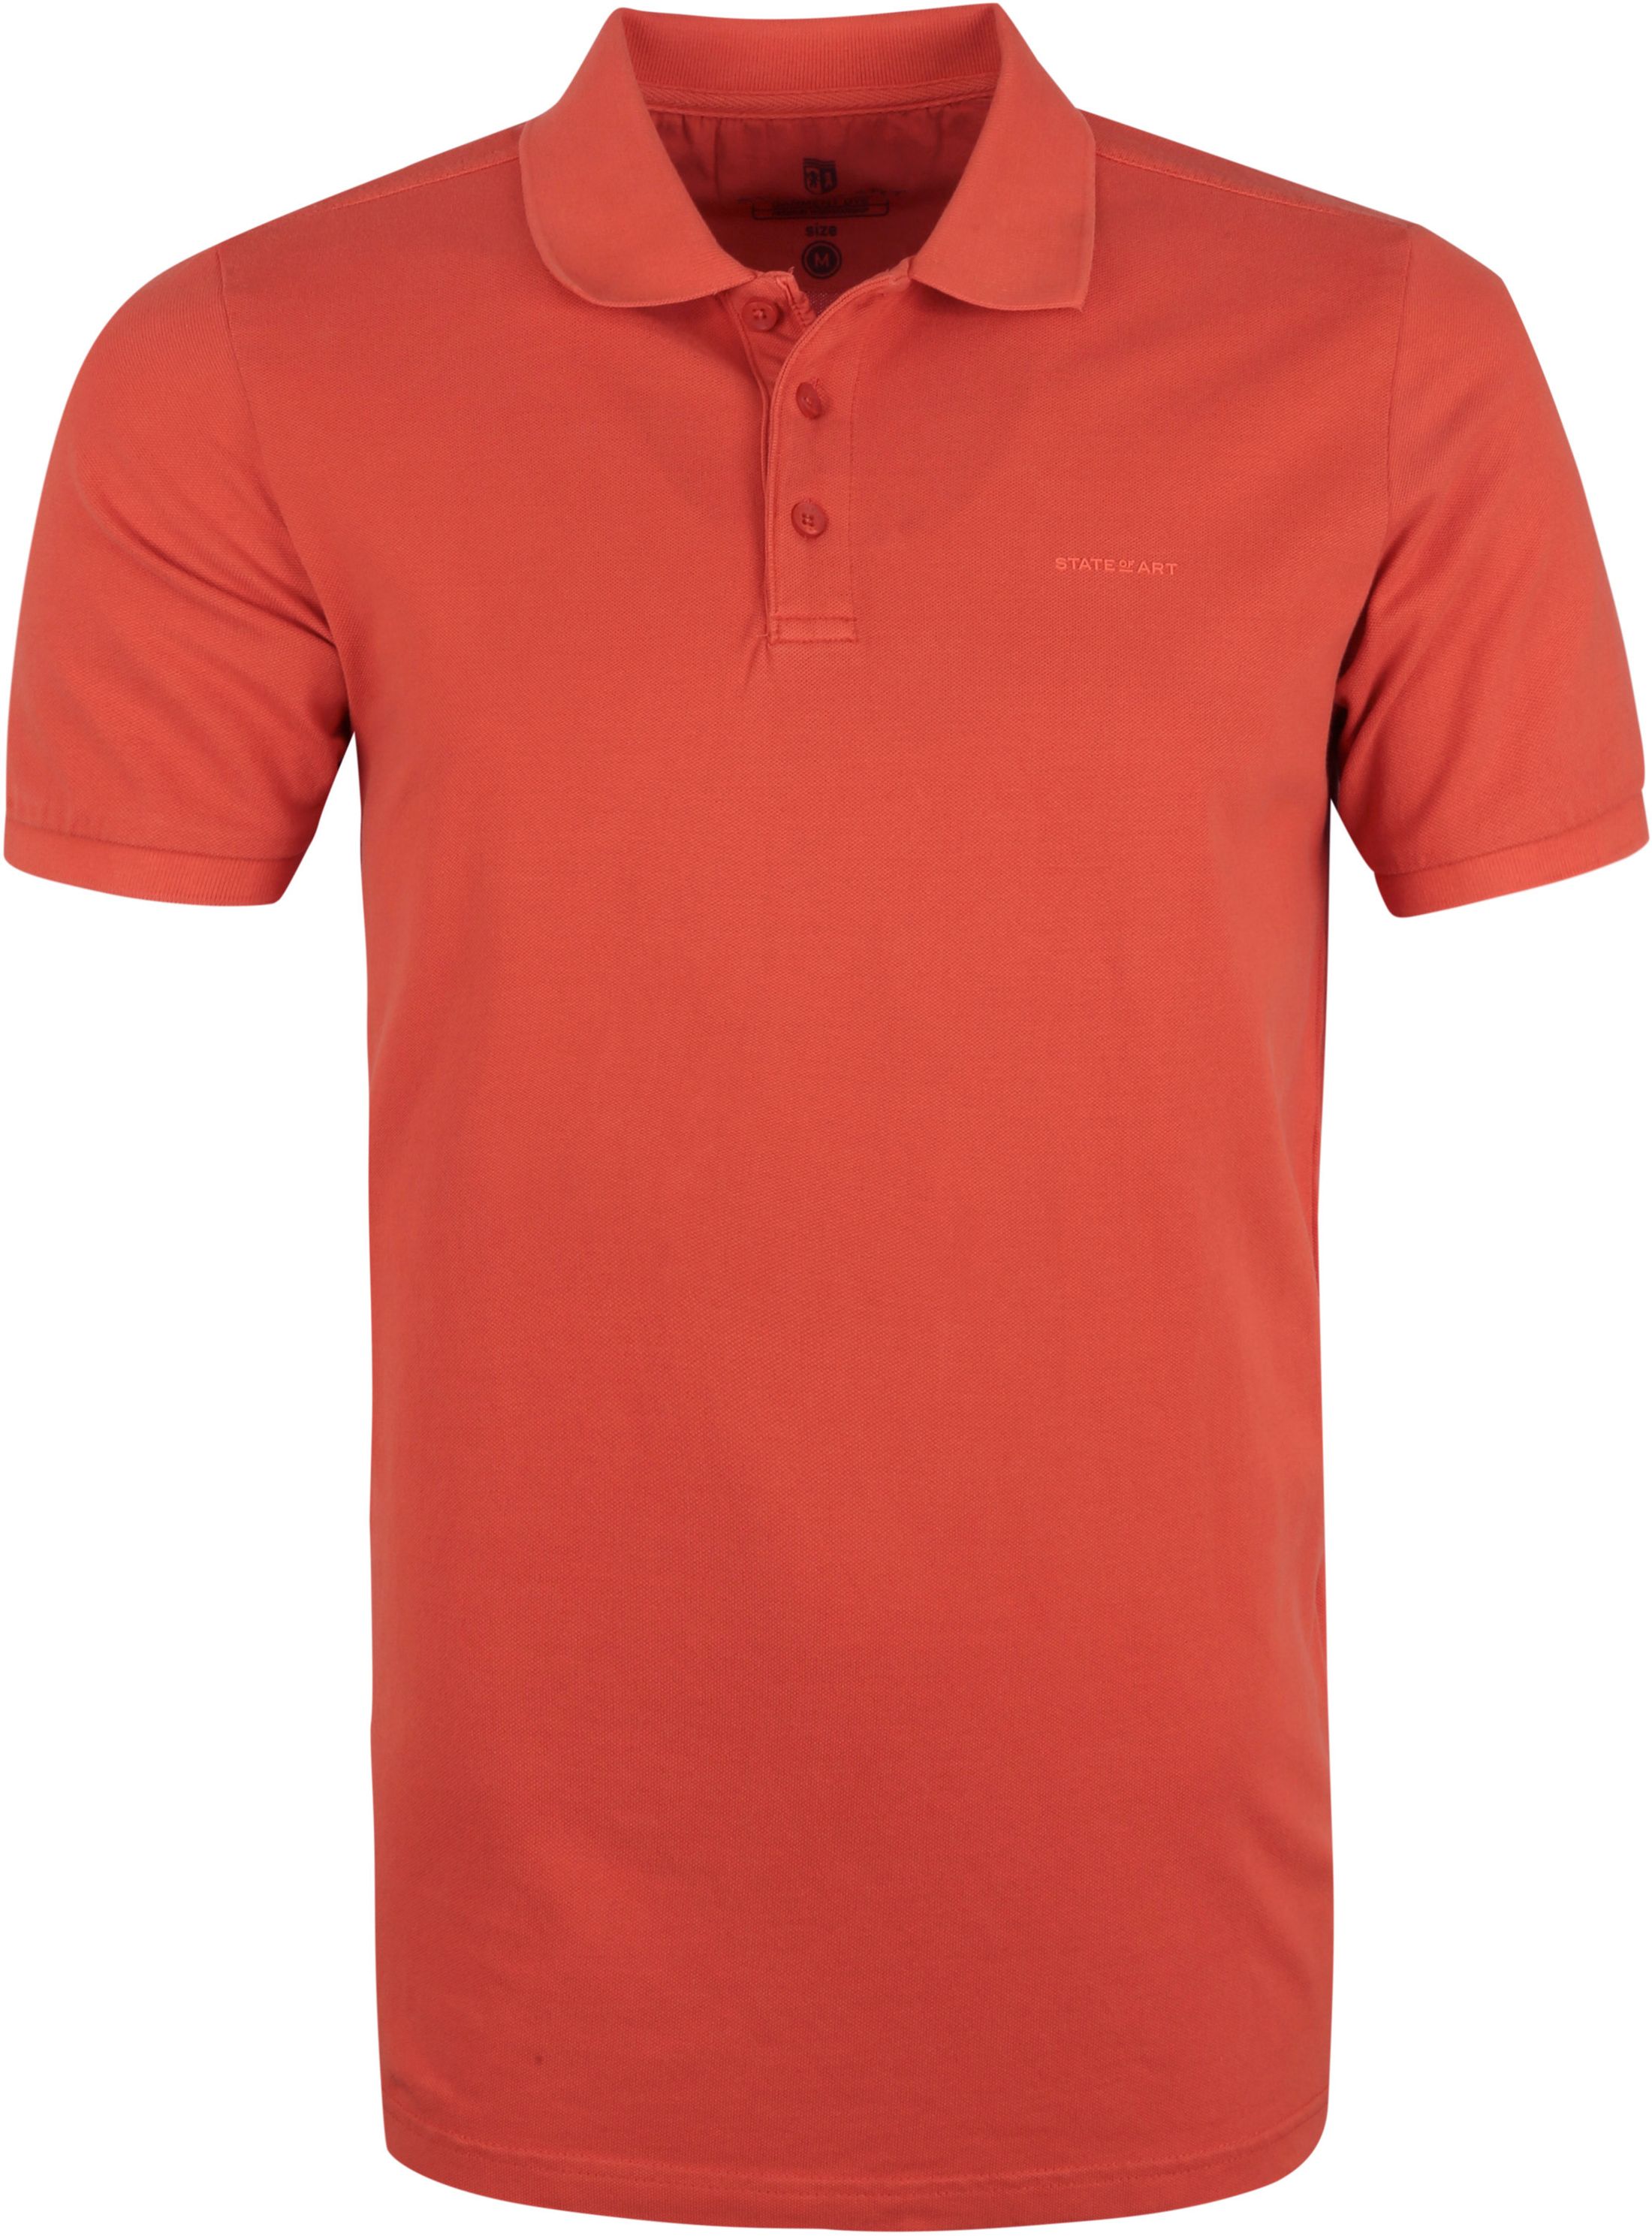 State Of Art Pique Polo Shirt Coral Red size 3XL